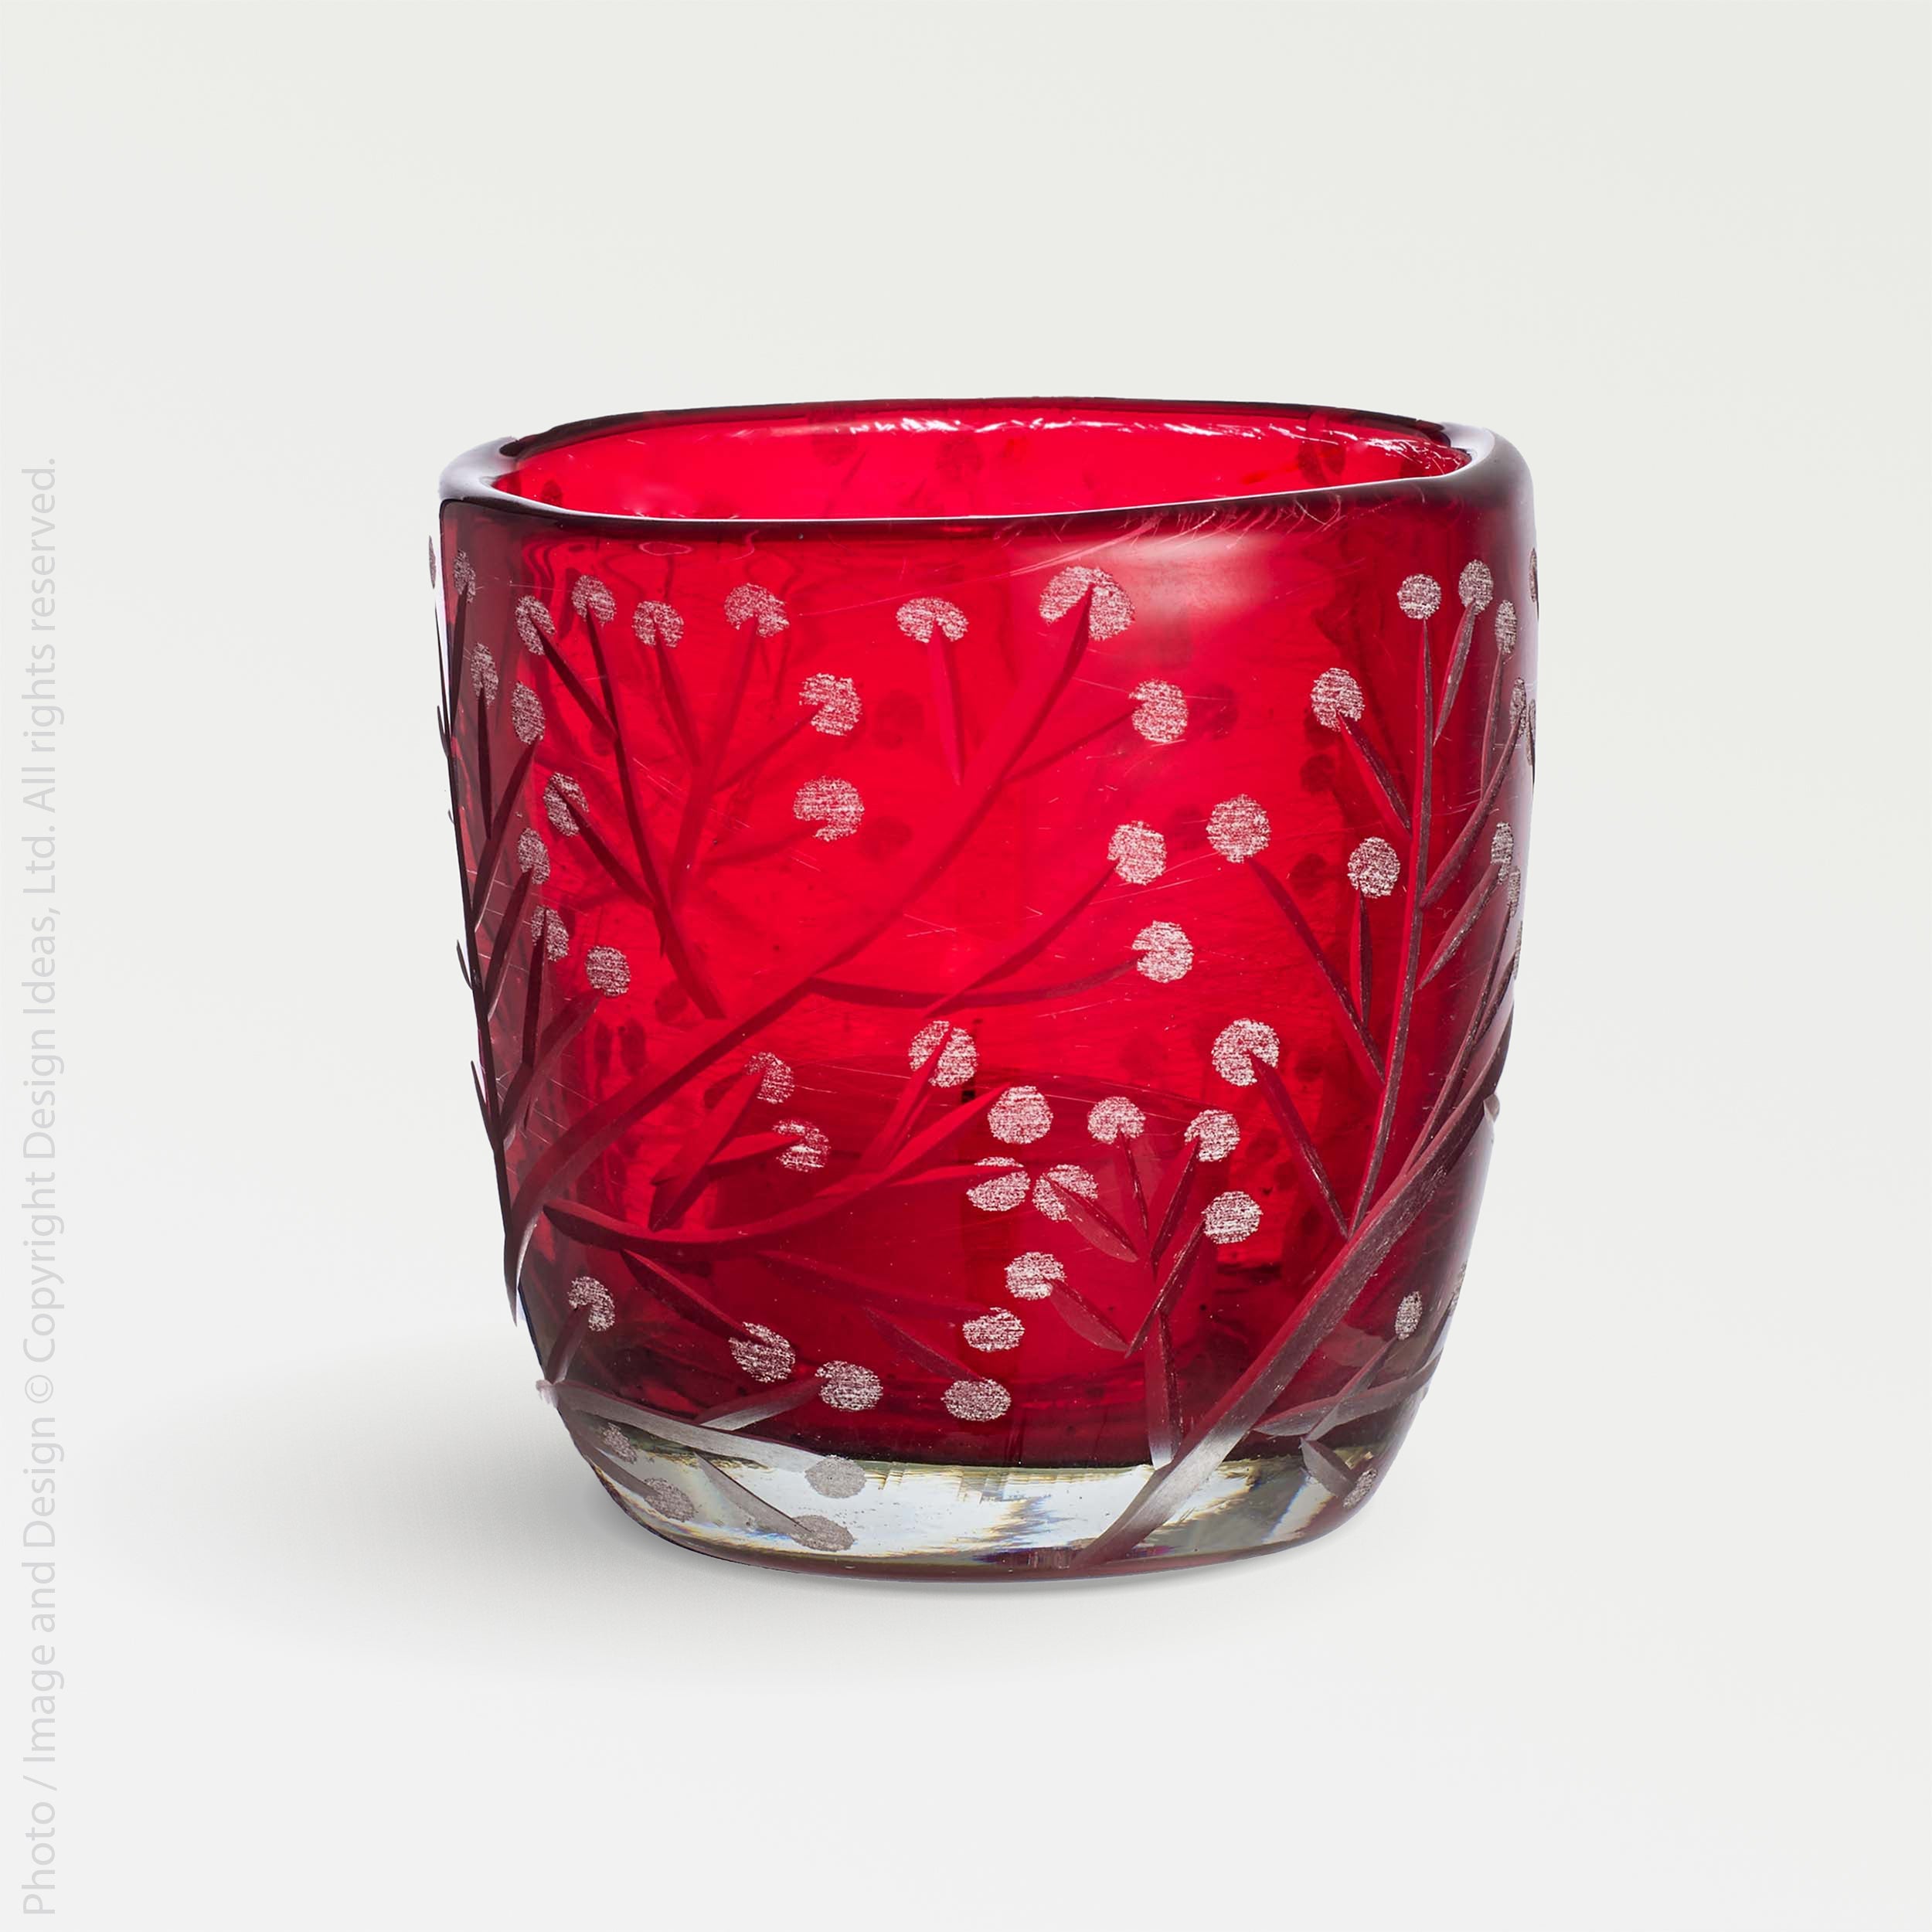 Vatisse™ candleholder - Red | Image 1 | Premium Candleholder from the Vatisse collection | made with Glass for long lasting use | texxture